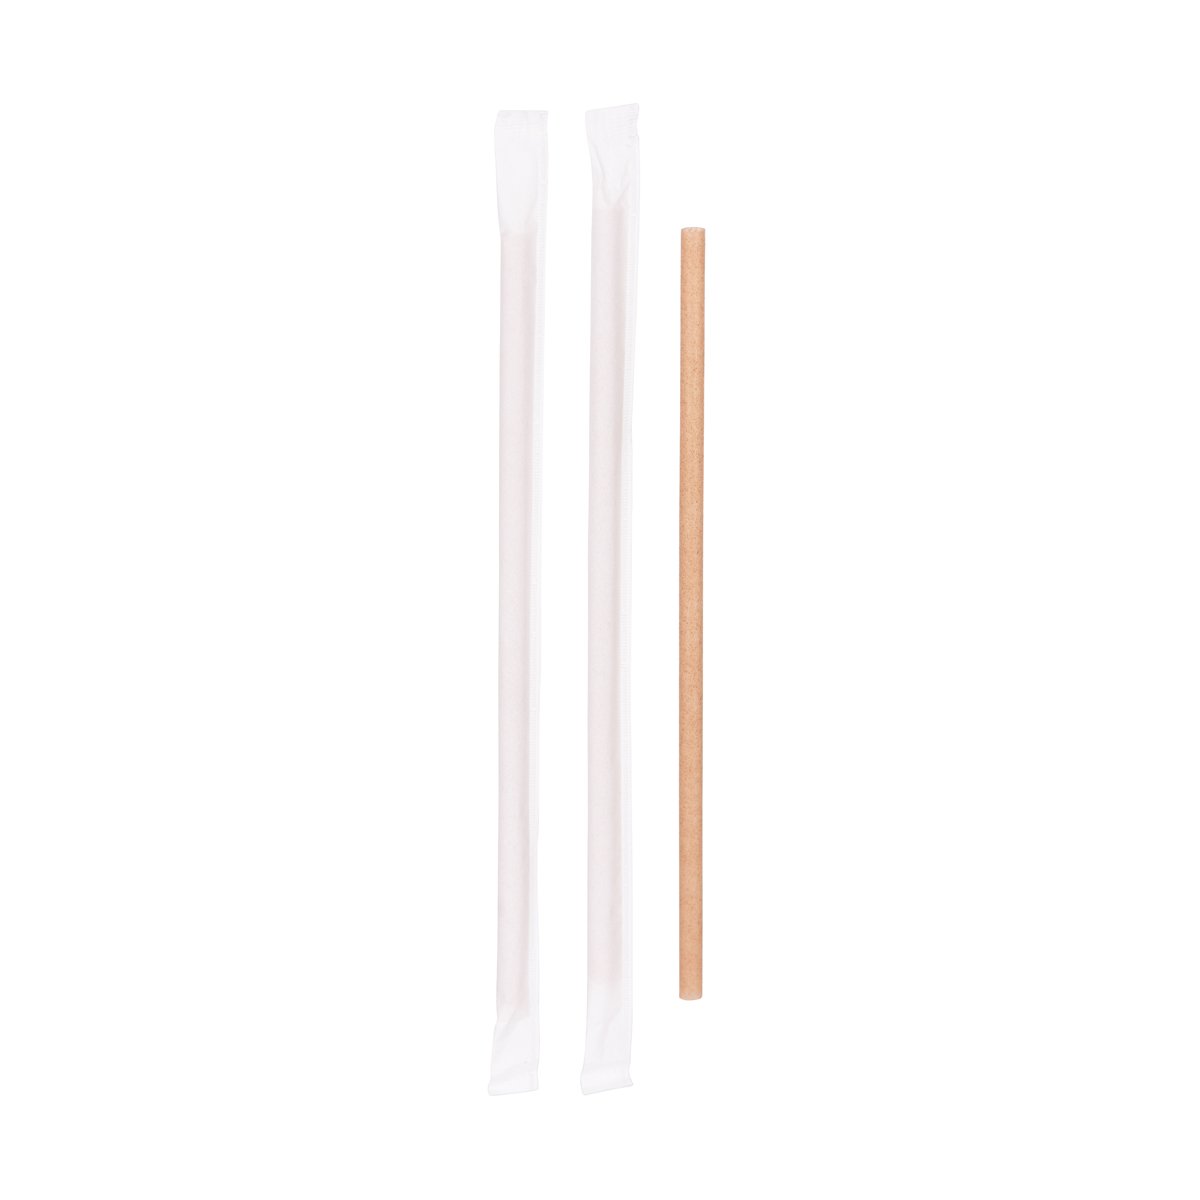 STHSC6WRPS Sugarcane with PLA Regular Straw Wrapped 6x200mm Tomkin Australia Hospitality Supplies